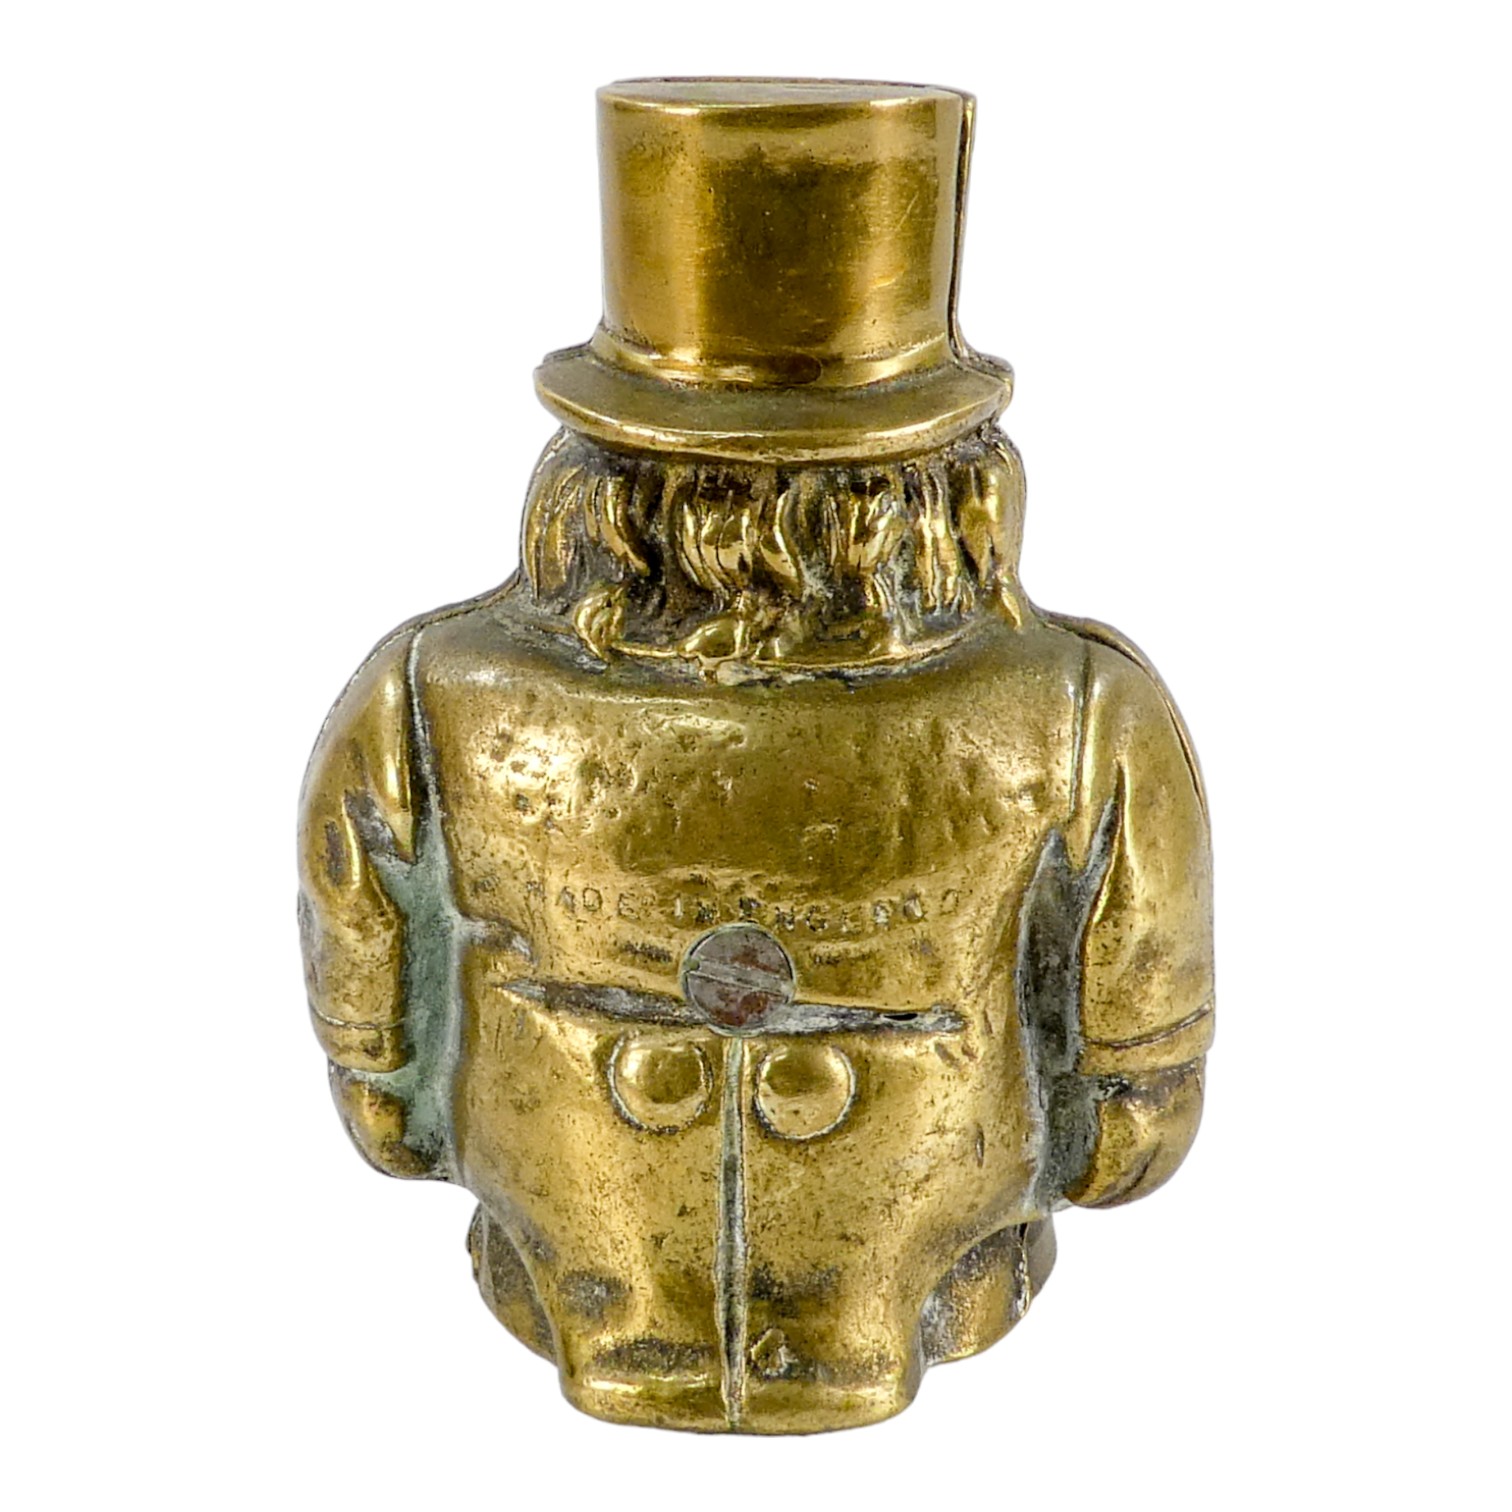 A vintage brass 'Transval' money box - modelled in the form of Paul Kruger, height 14cm. - Image 3 of 7